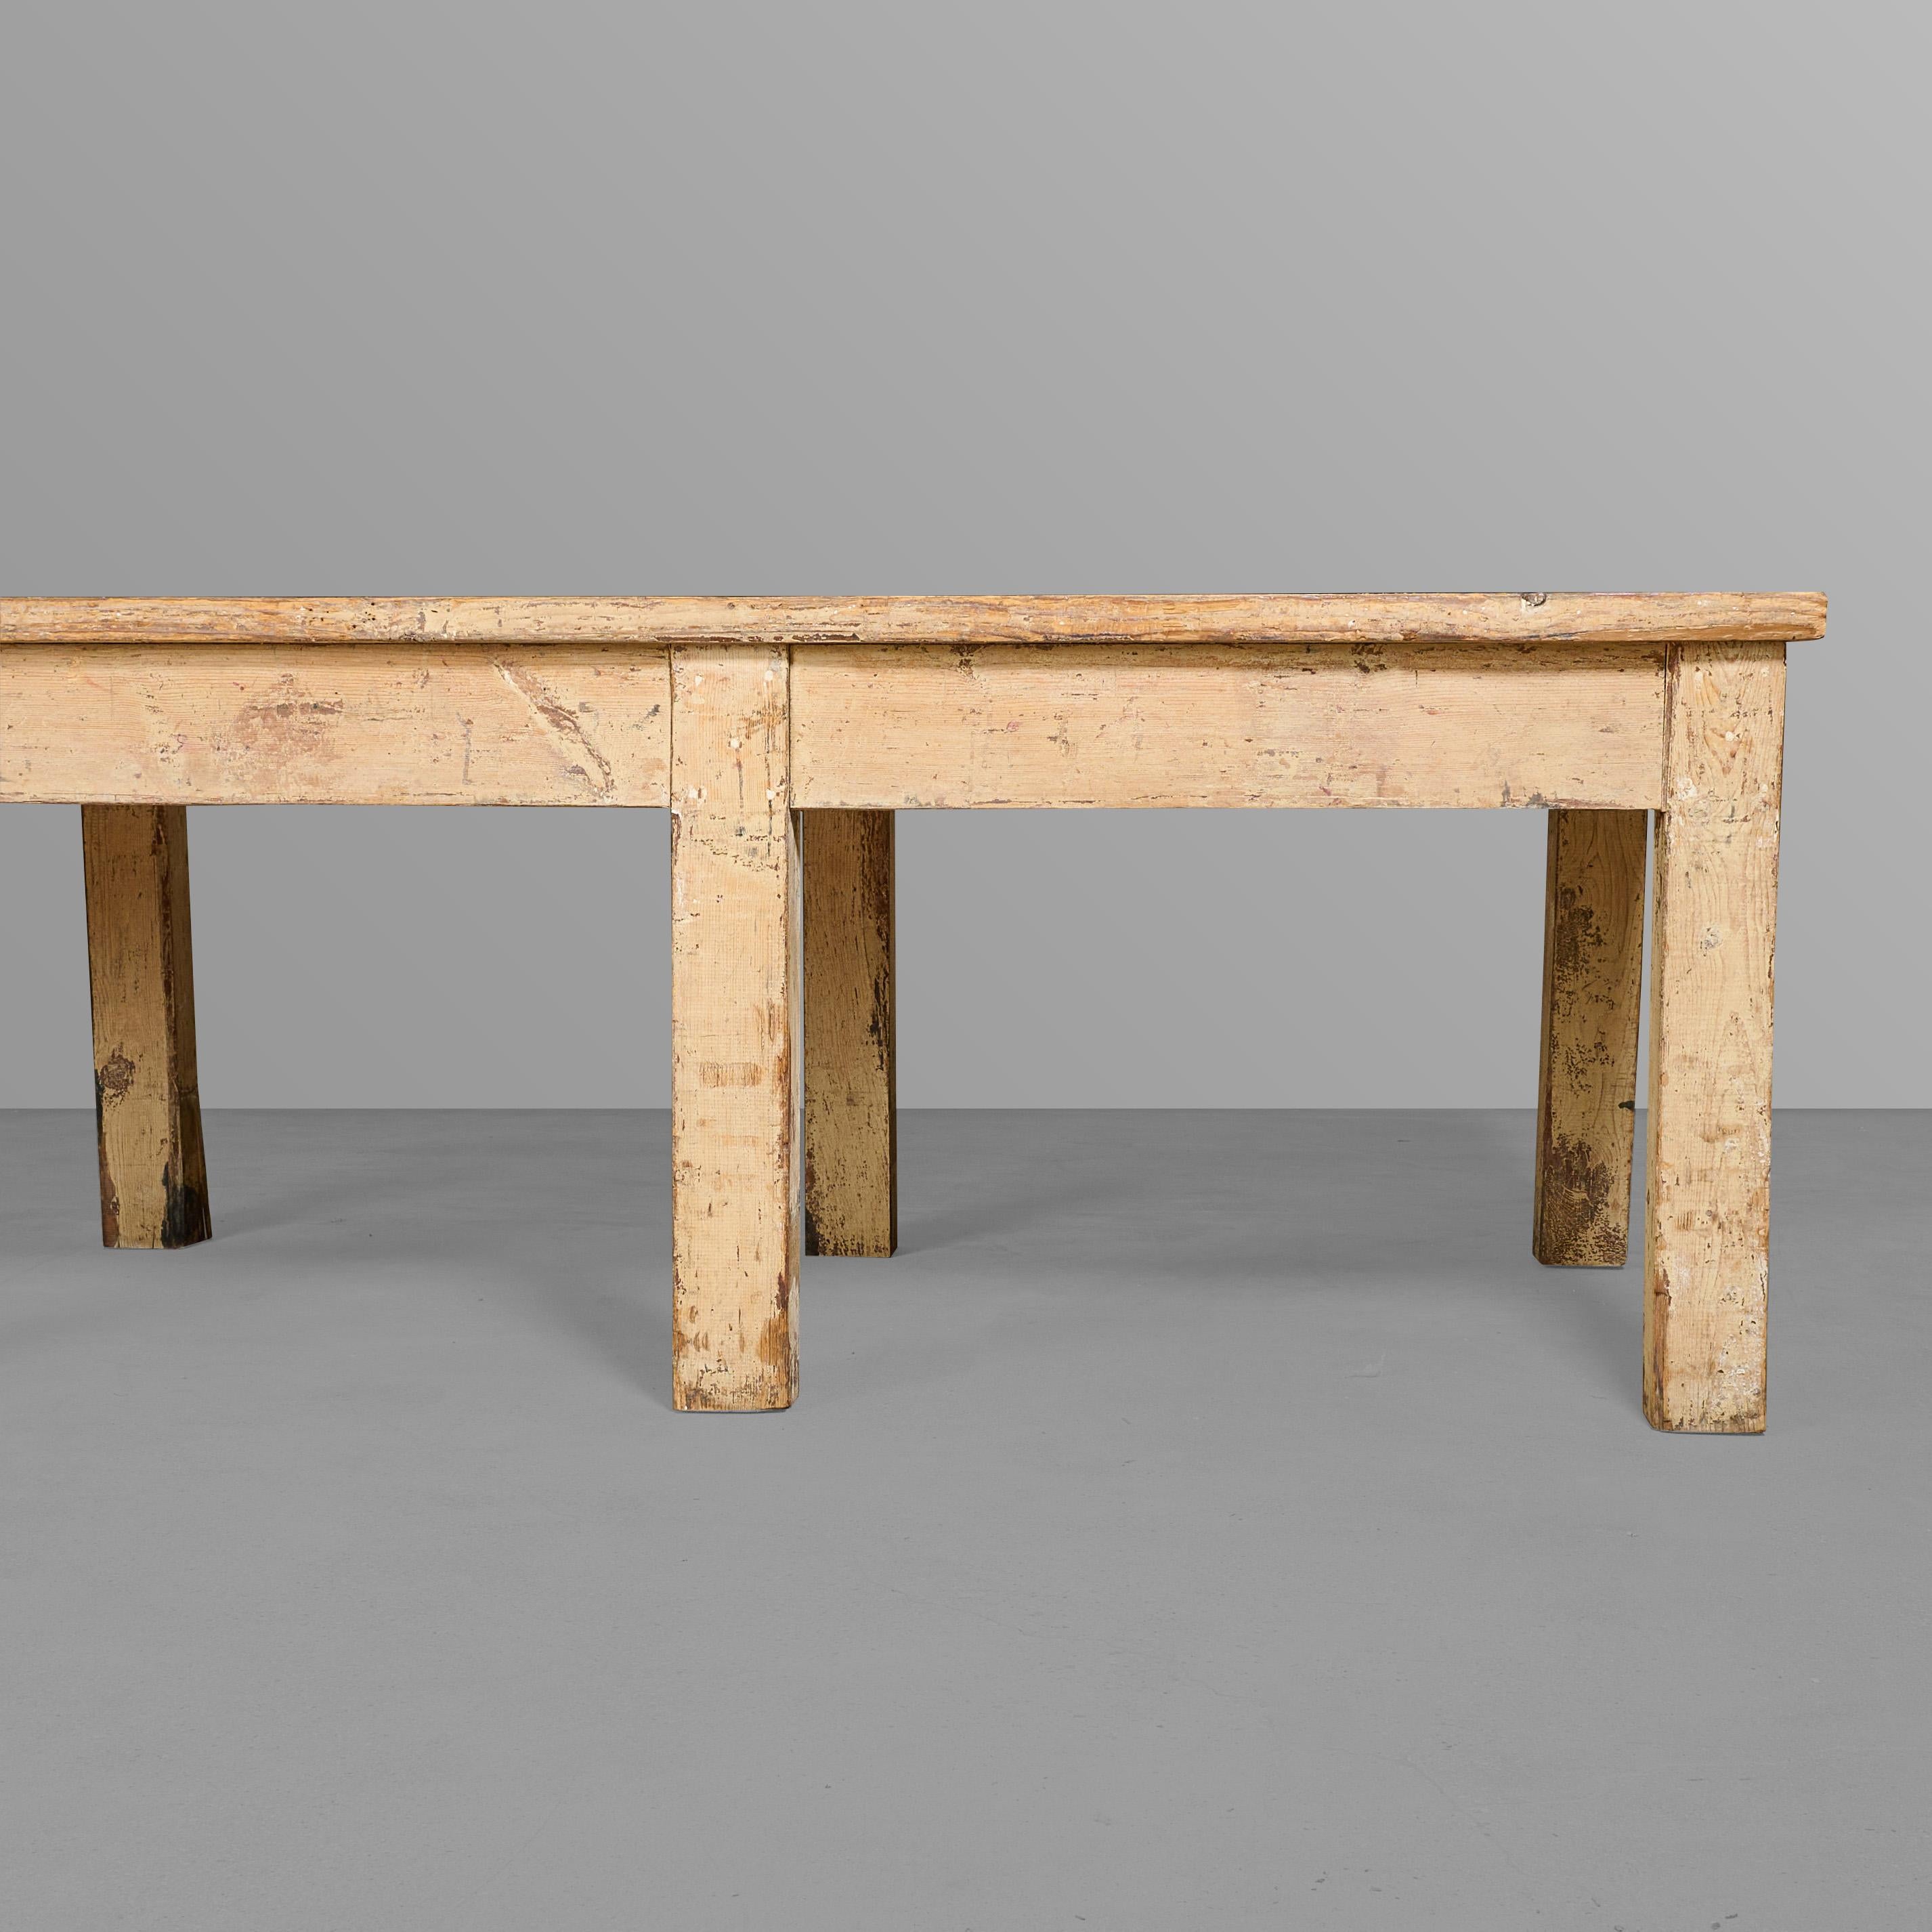 Large and heavy duty eight leg table with tenon construction. Very nice patina.

